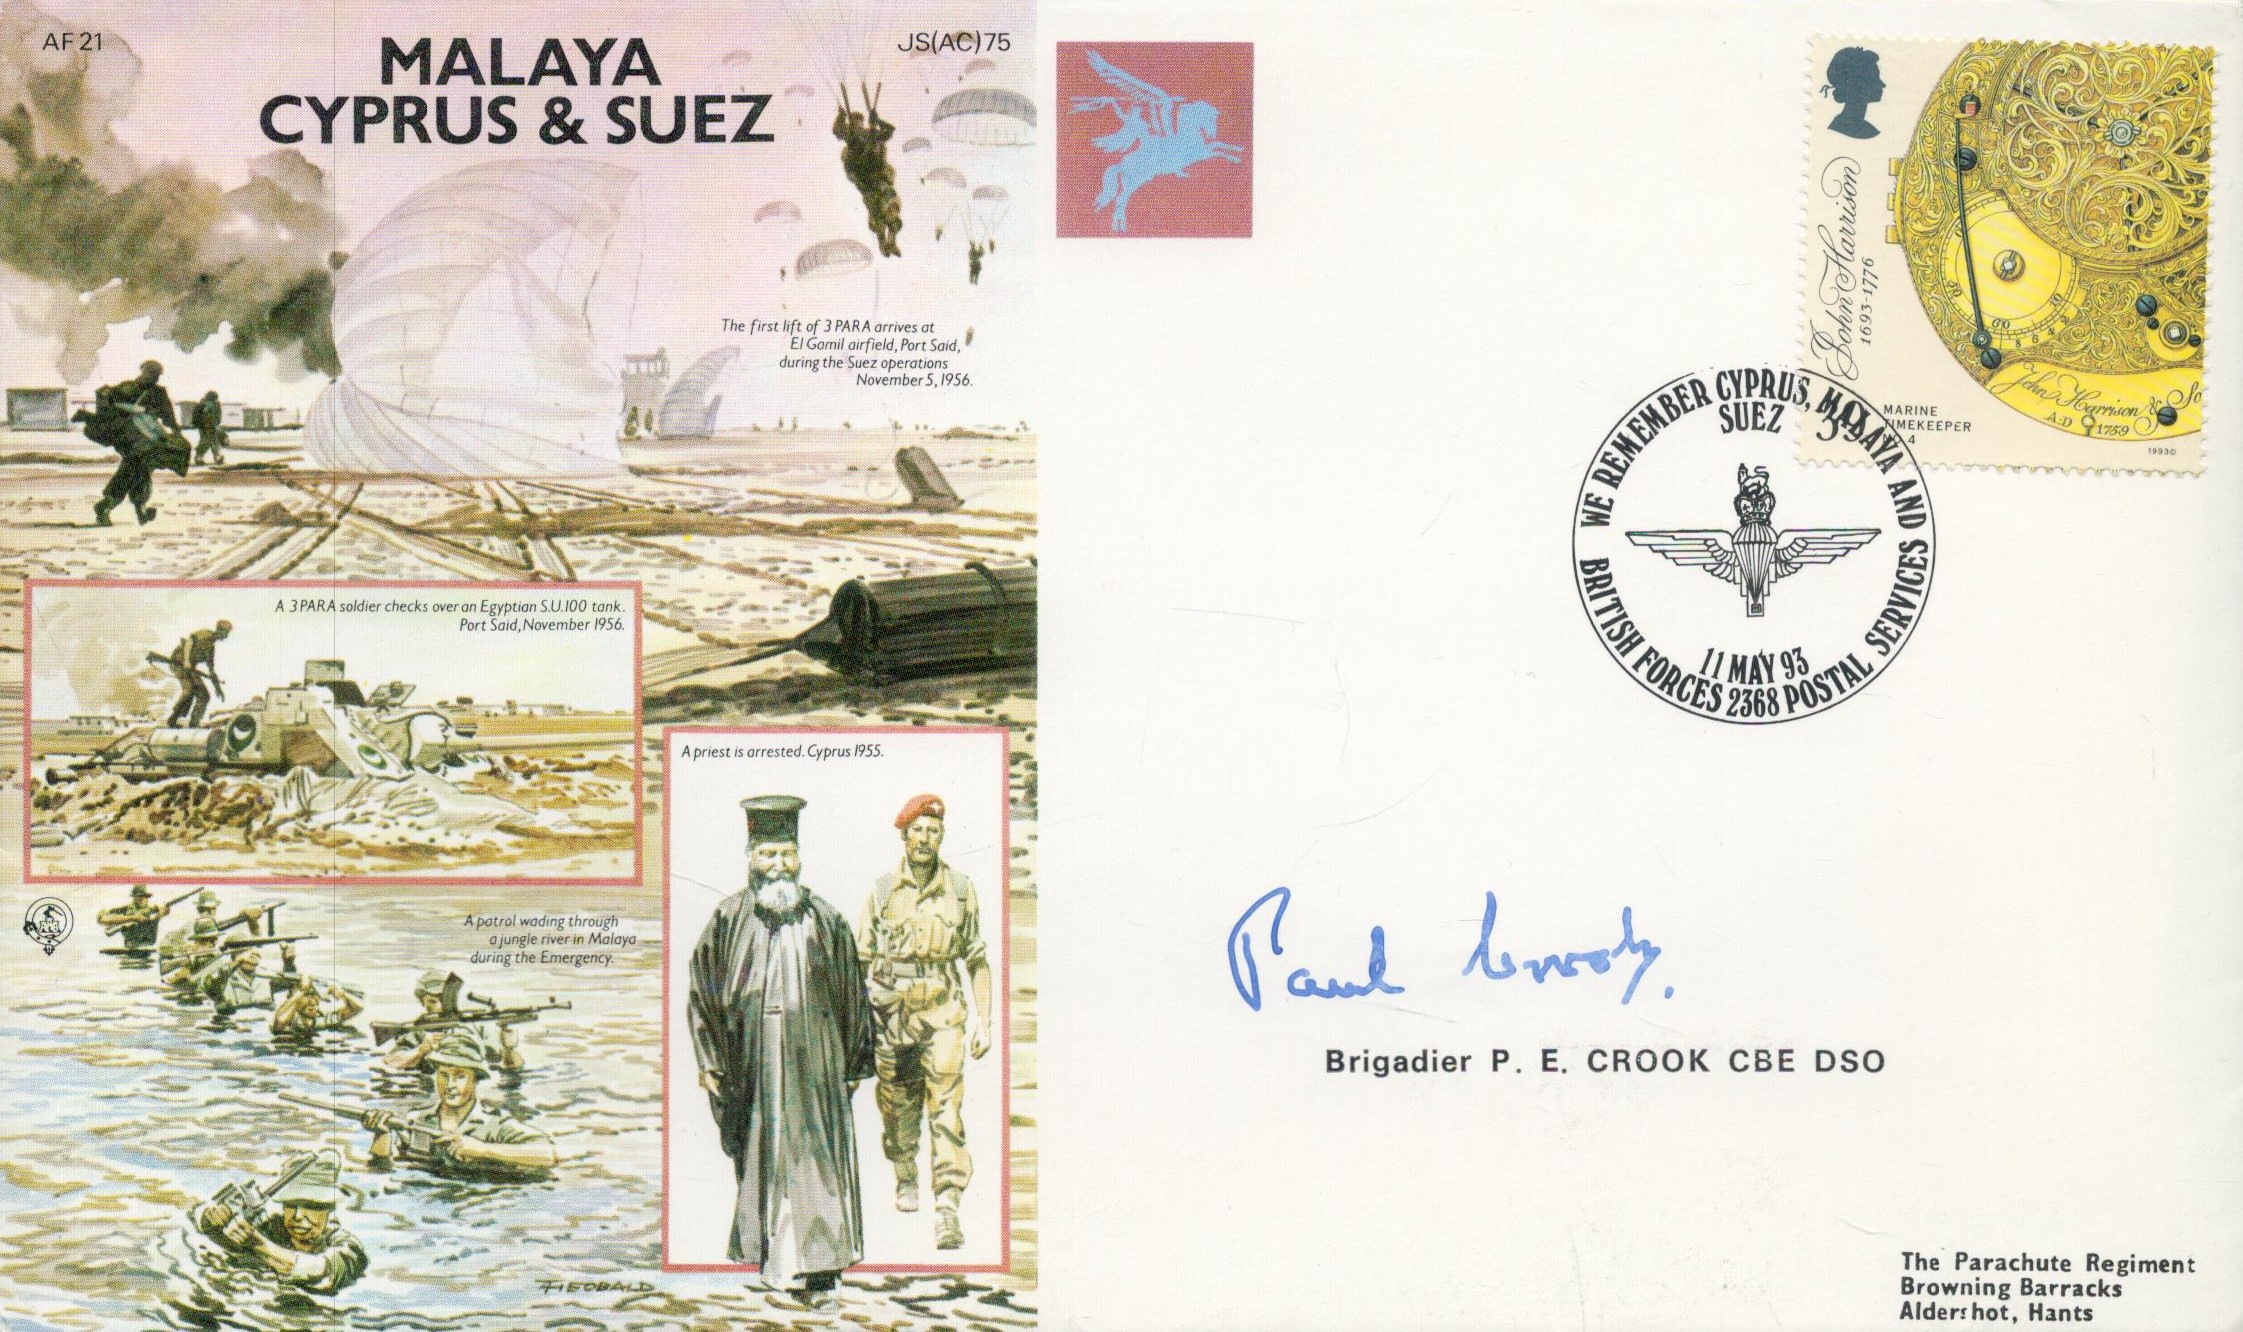 Brigadier Paul E Crook Signed and Flown FDC Malaya Cyprus and Suez, 11/05/1993, with Stamp and